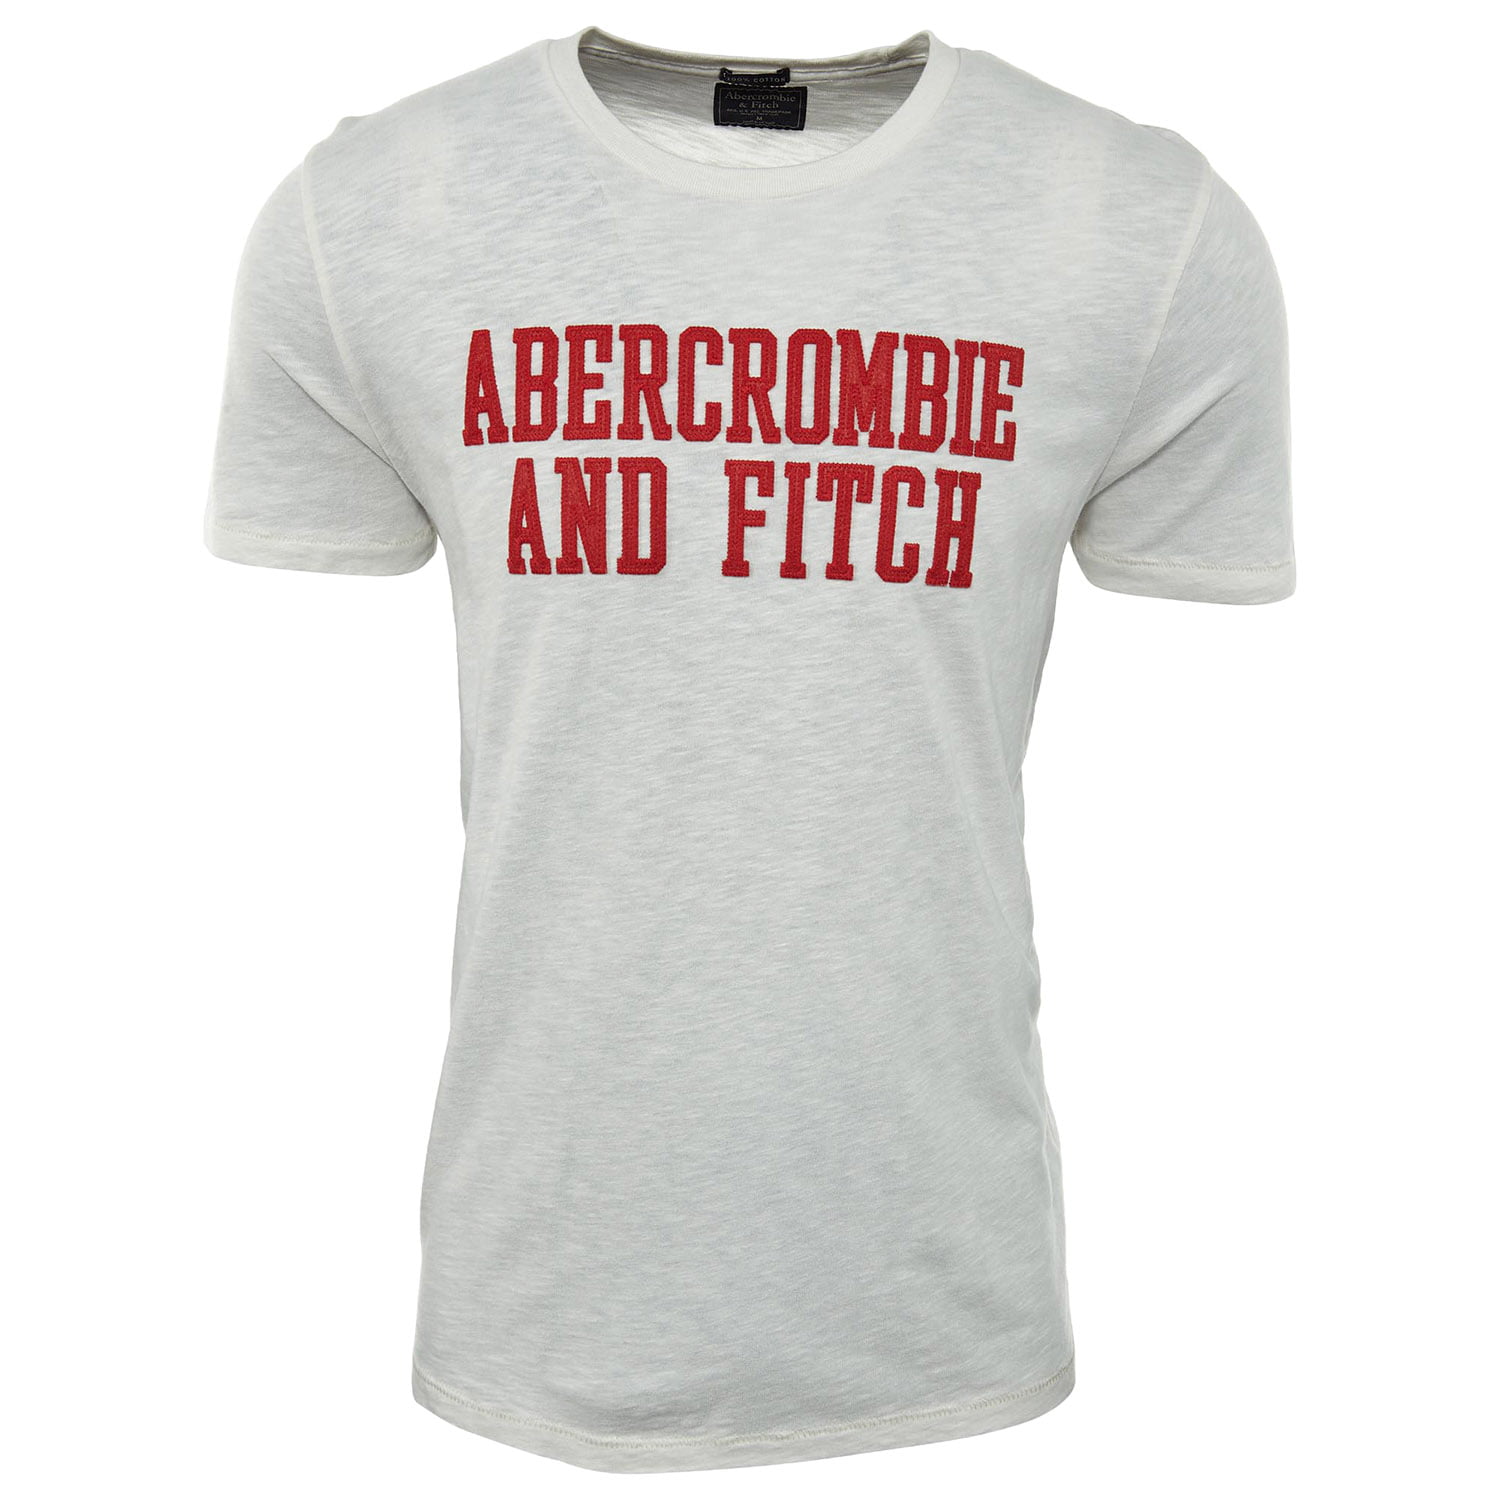 Abercrombie & Fitch - Abercrombie & Fitch Applique Logo Tee Mens Style